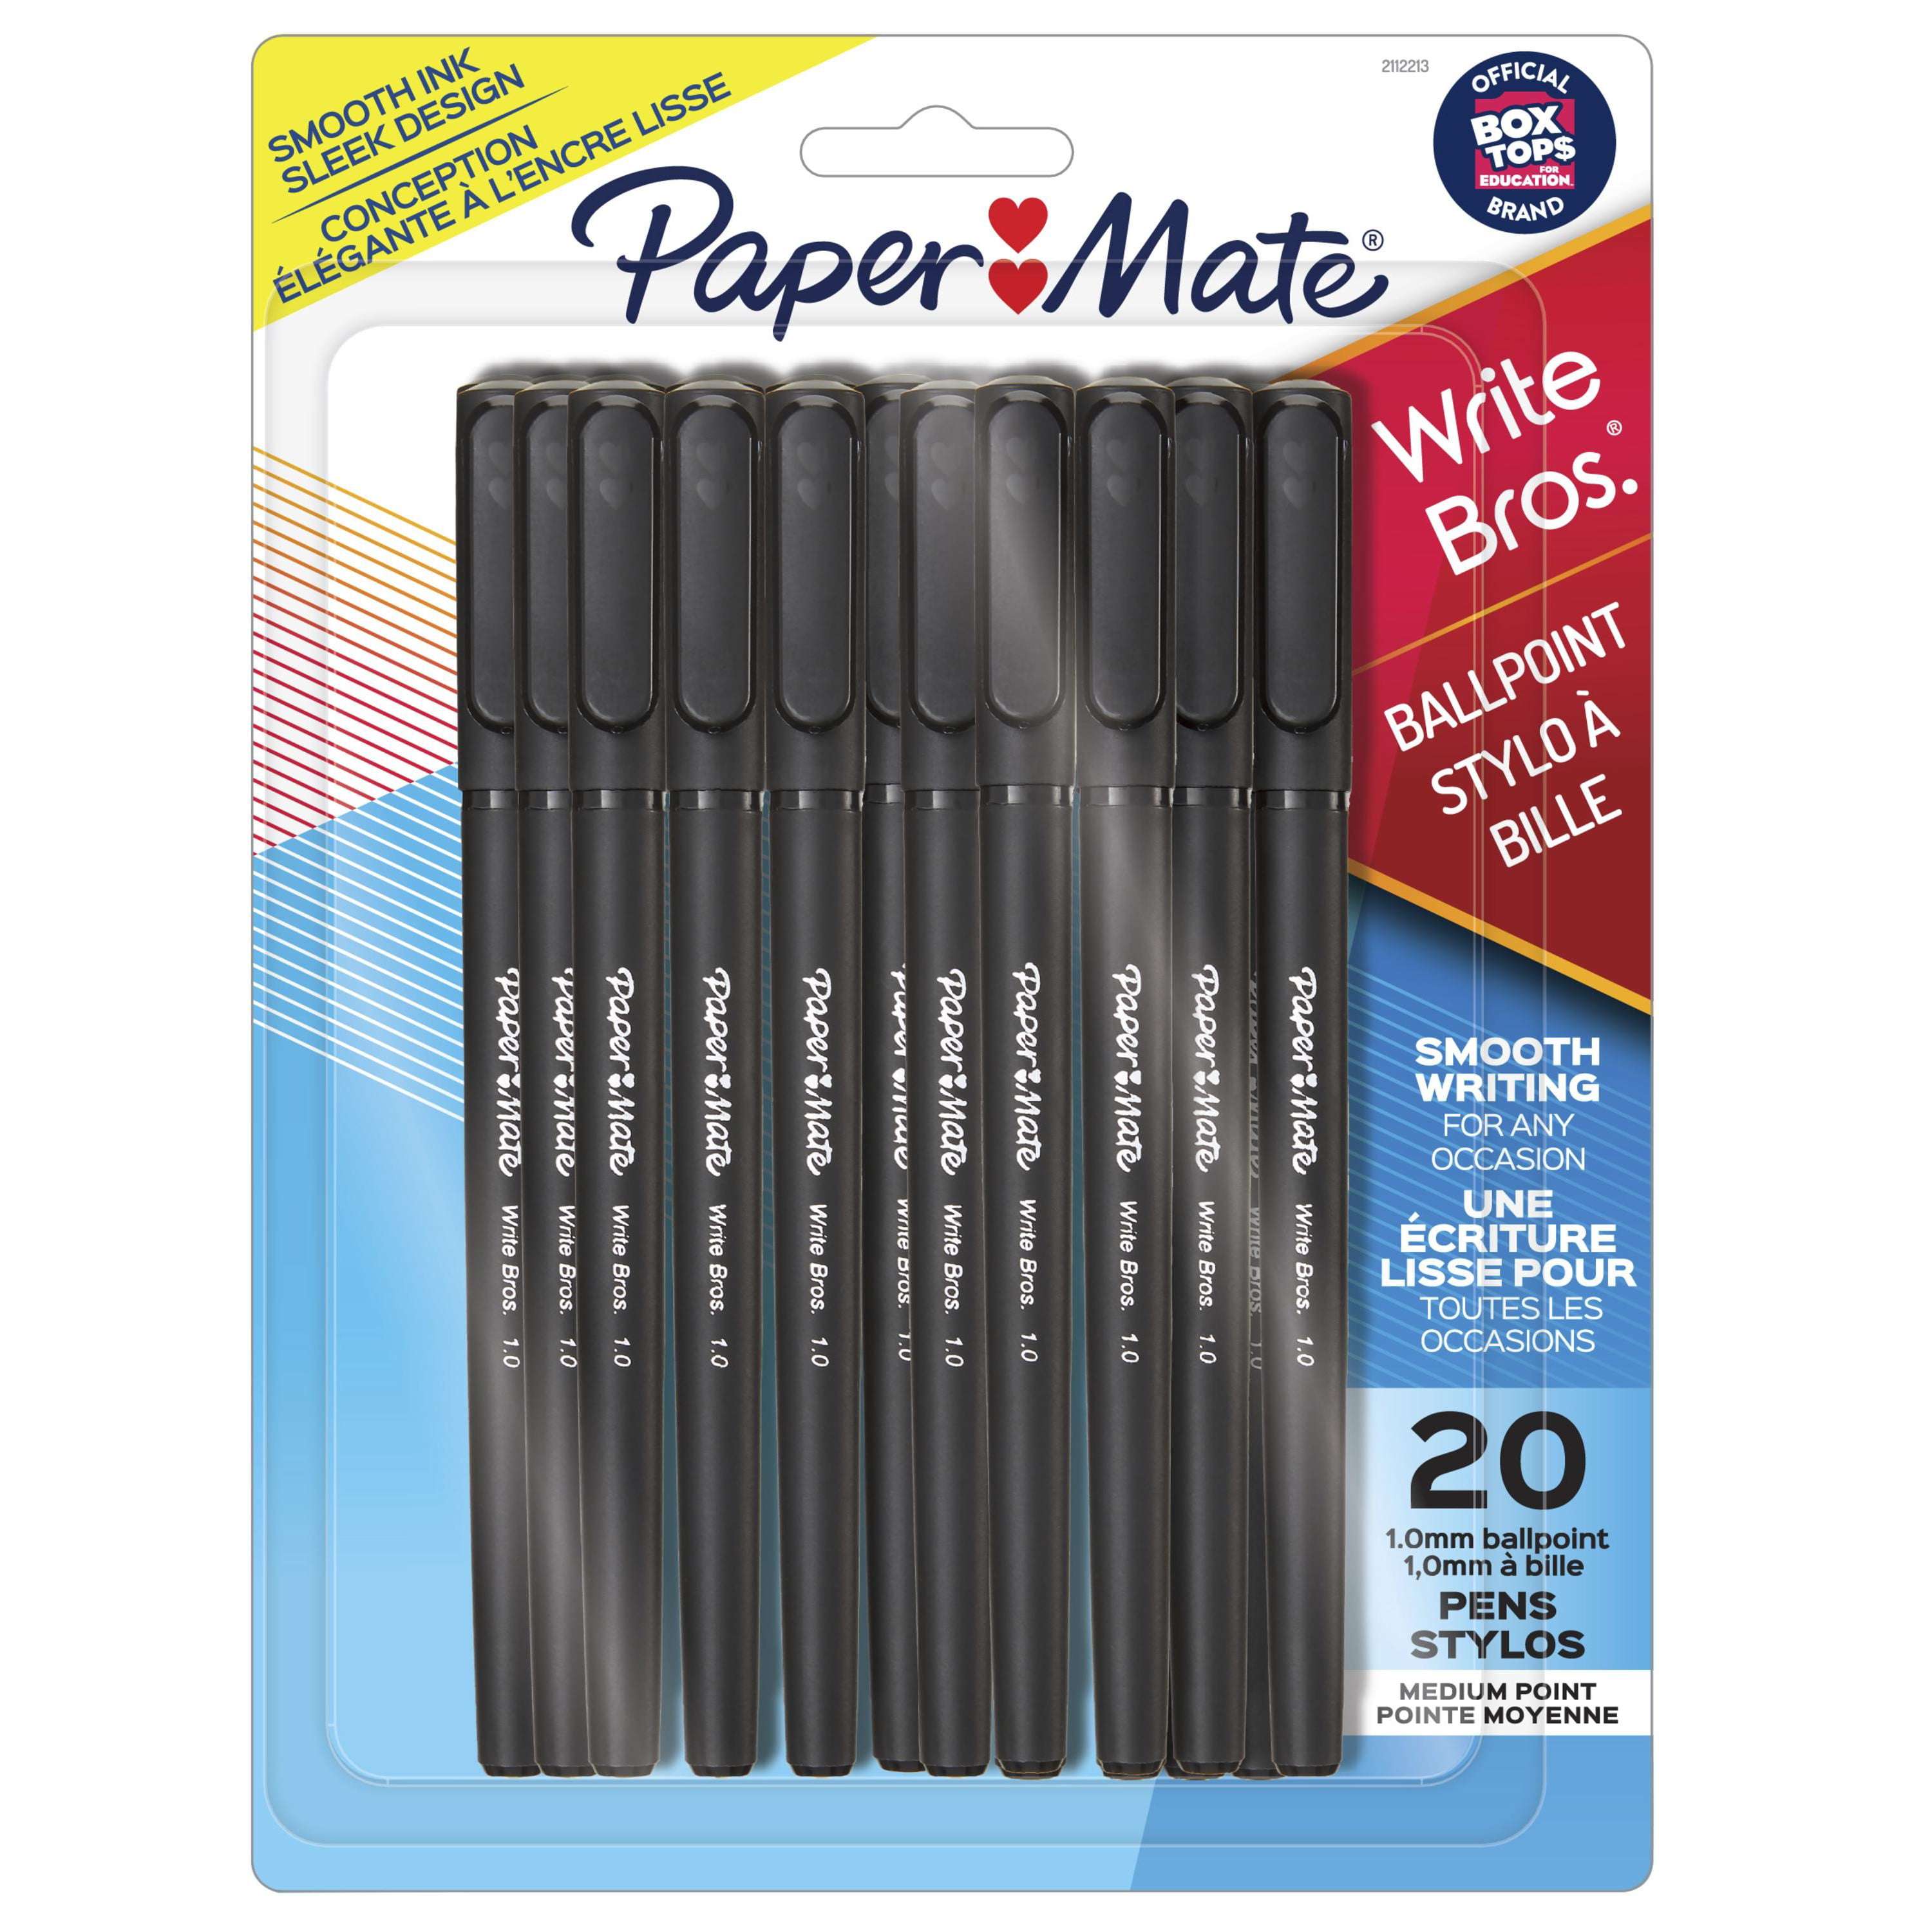 Paper Mate® Write Bros Stick Ballpoint Pen Blue Ink 12 Count 1mm Ball Point Pens 